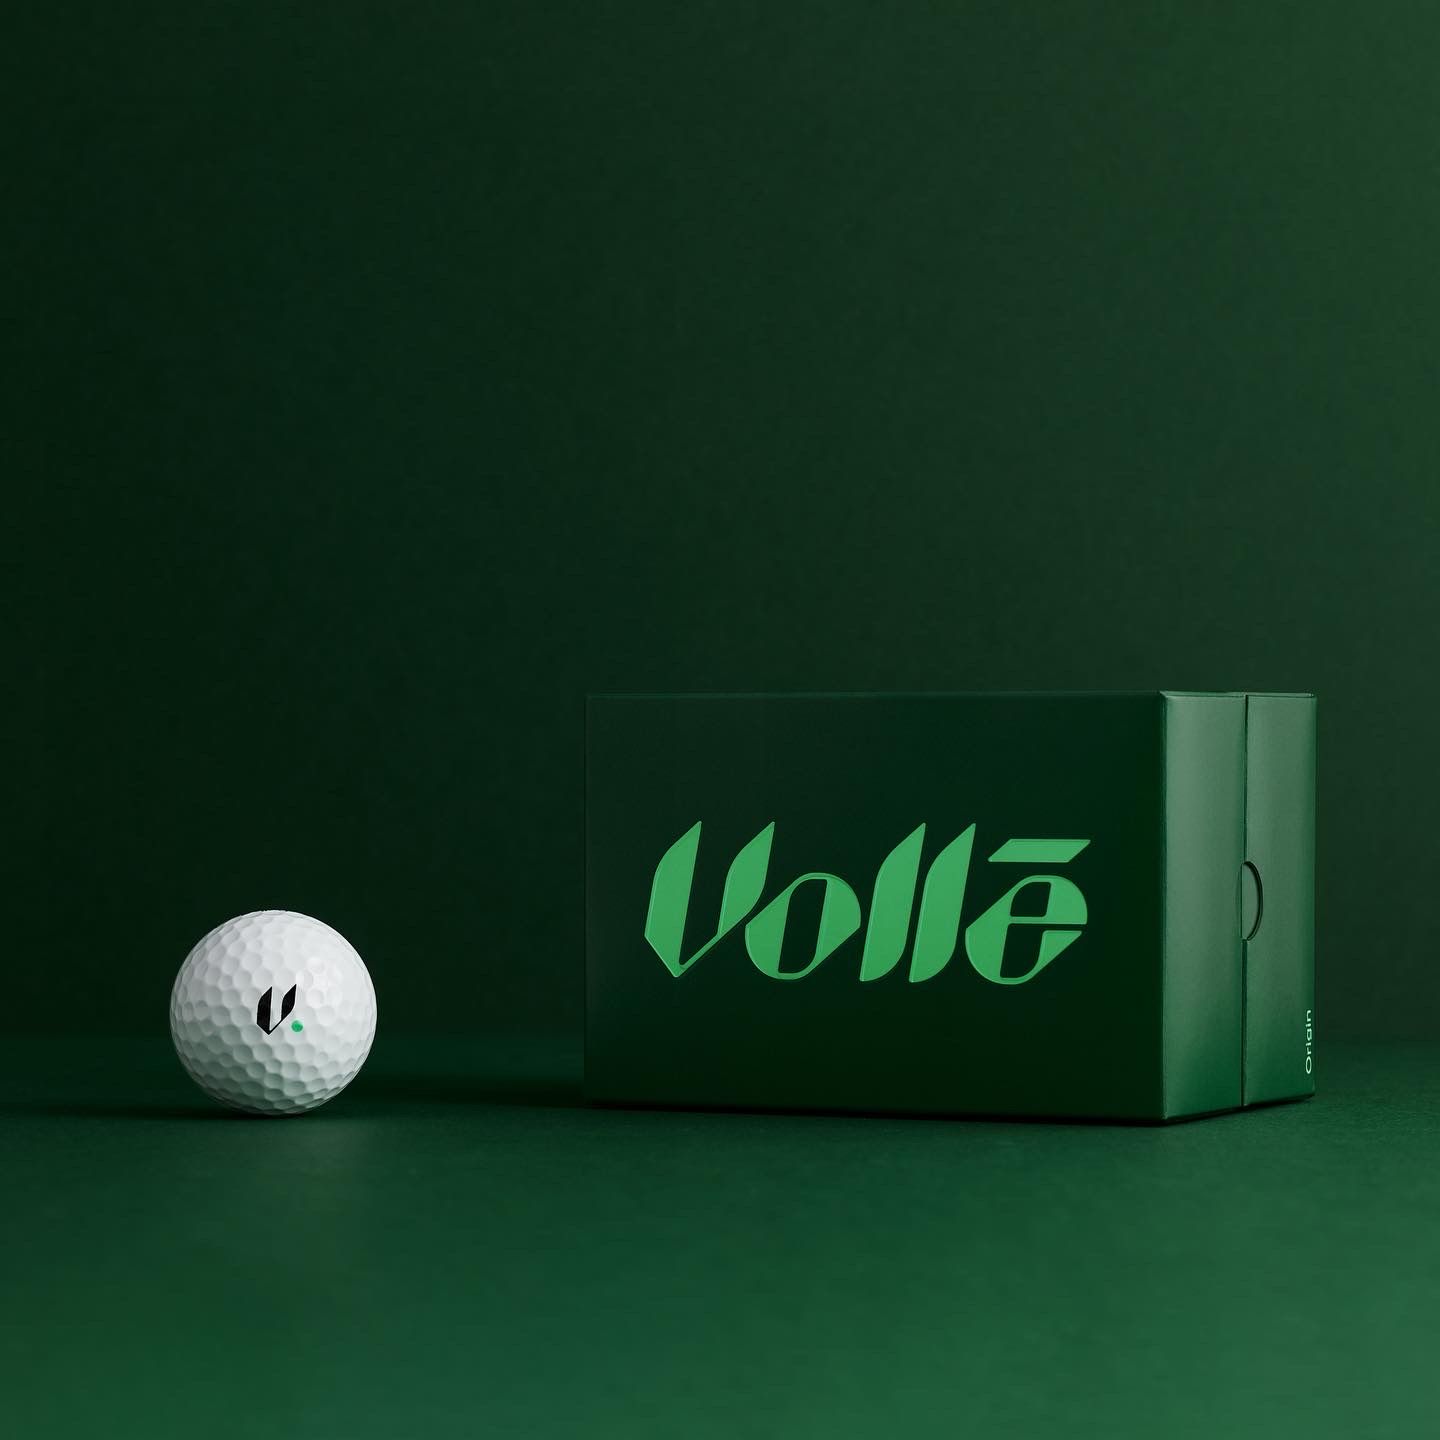 Volle Golf Is New Zealand’s First Direct To Consumer Golf Ball